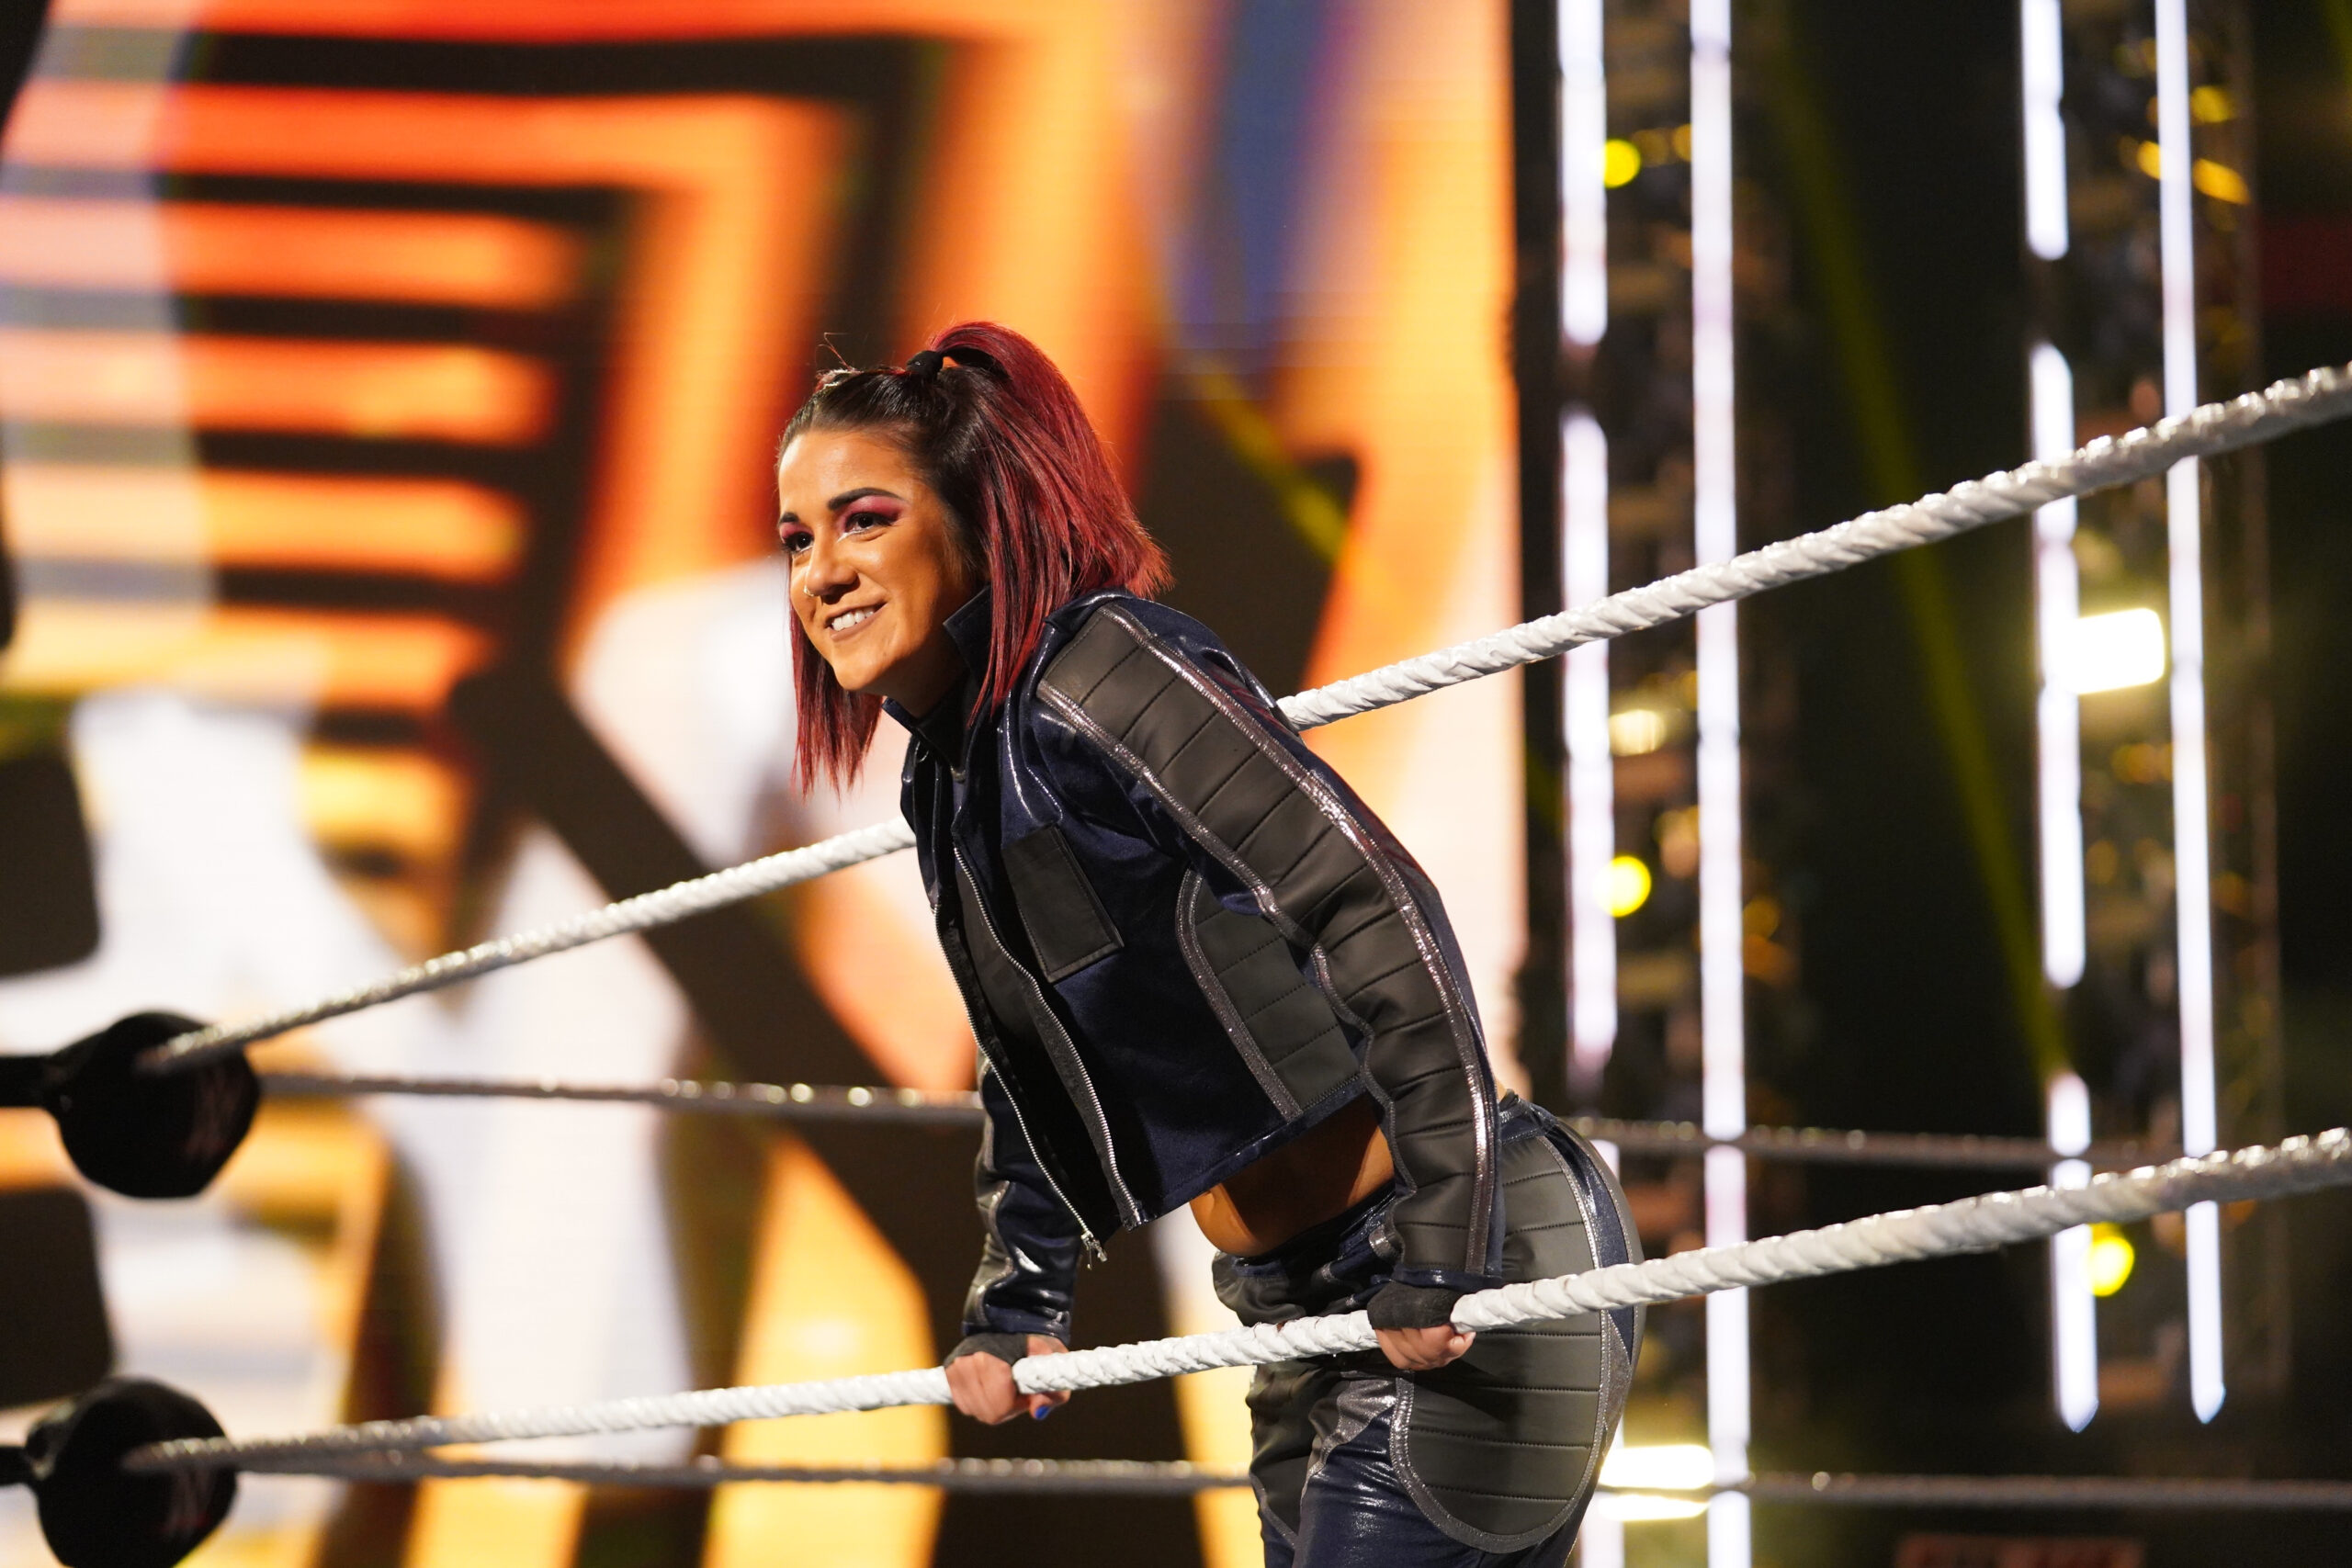 Bayley Shares Insights and Reflections on Her Title Win at WWE NXT Takeover Brooklyn